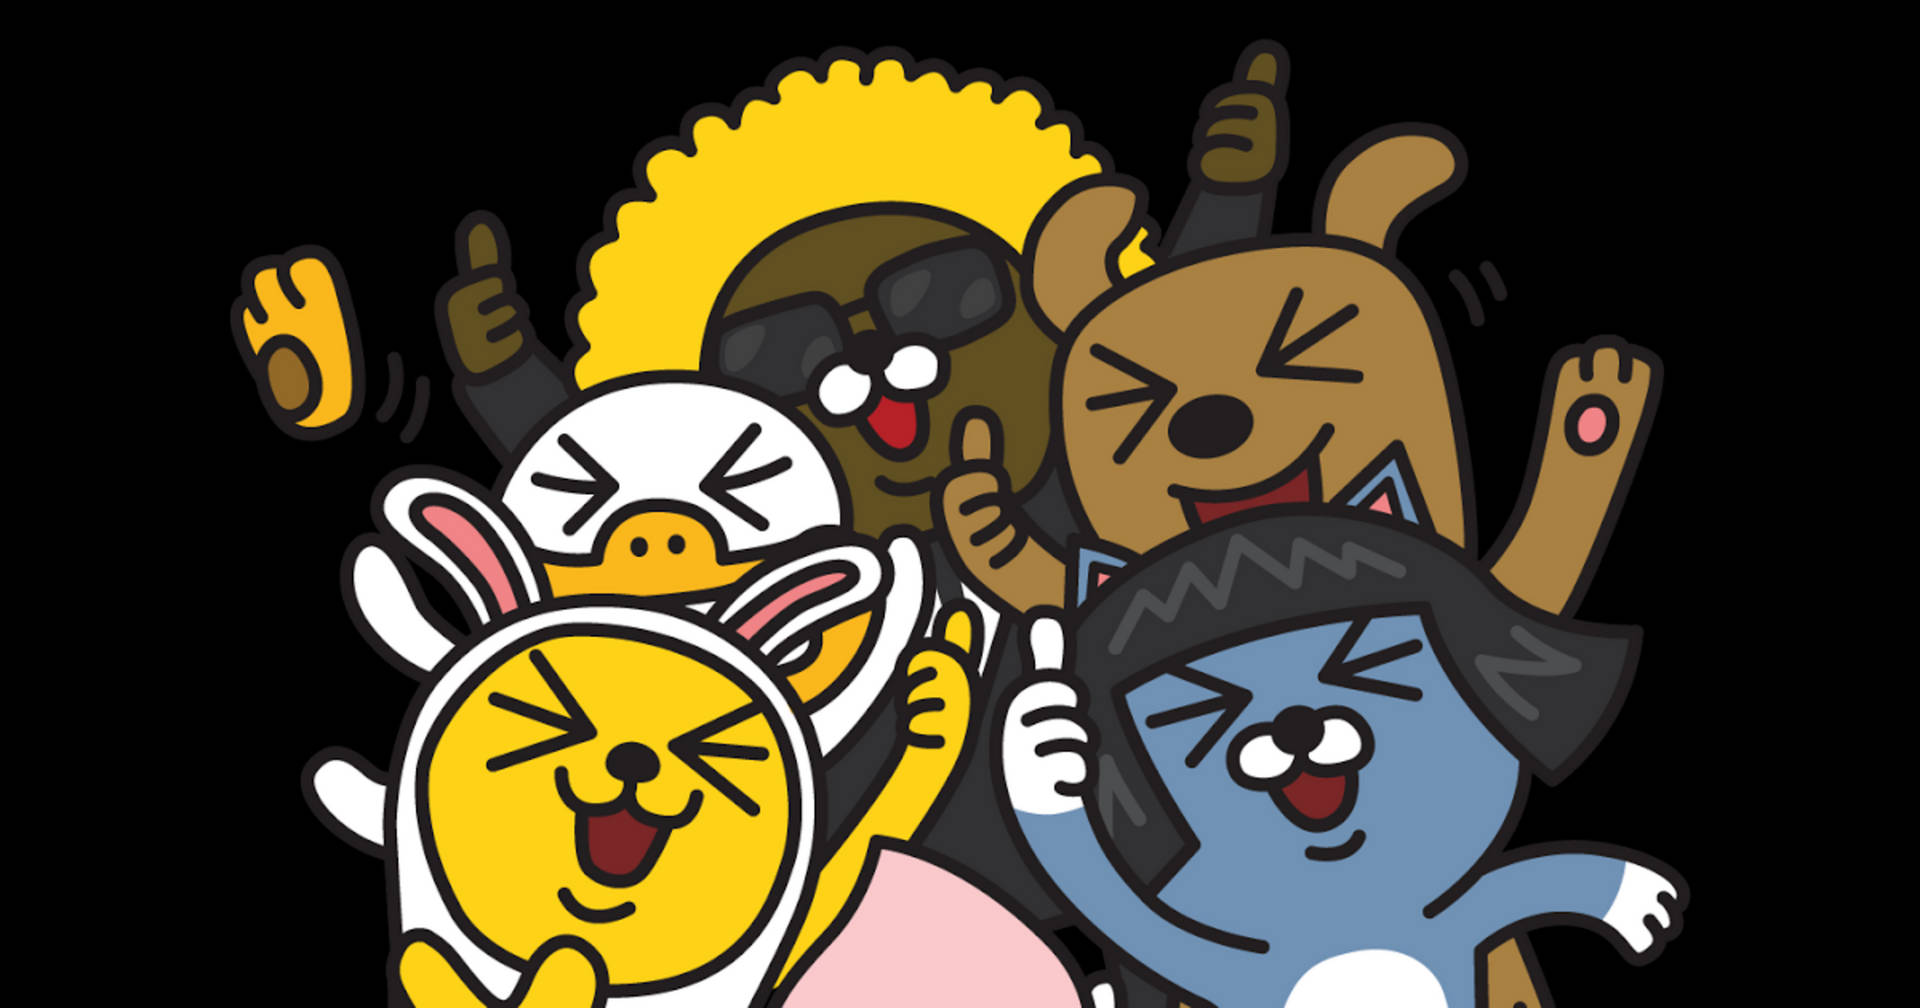 Let's Give A Thumbs Up To Kakao Friends! Background